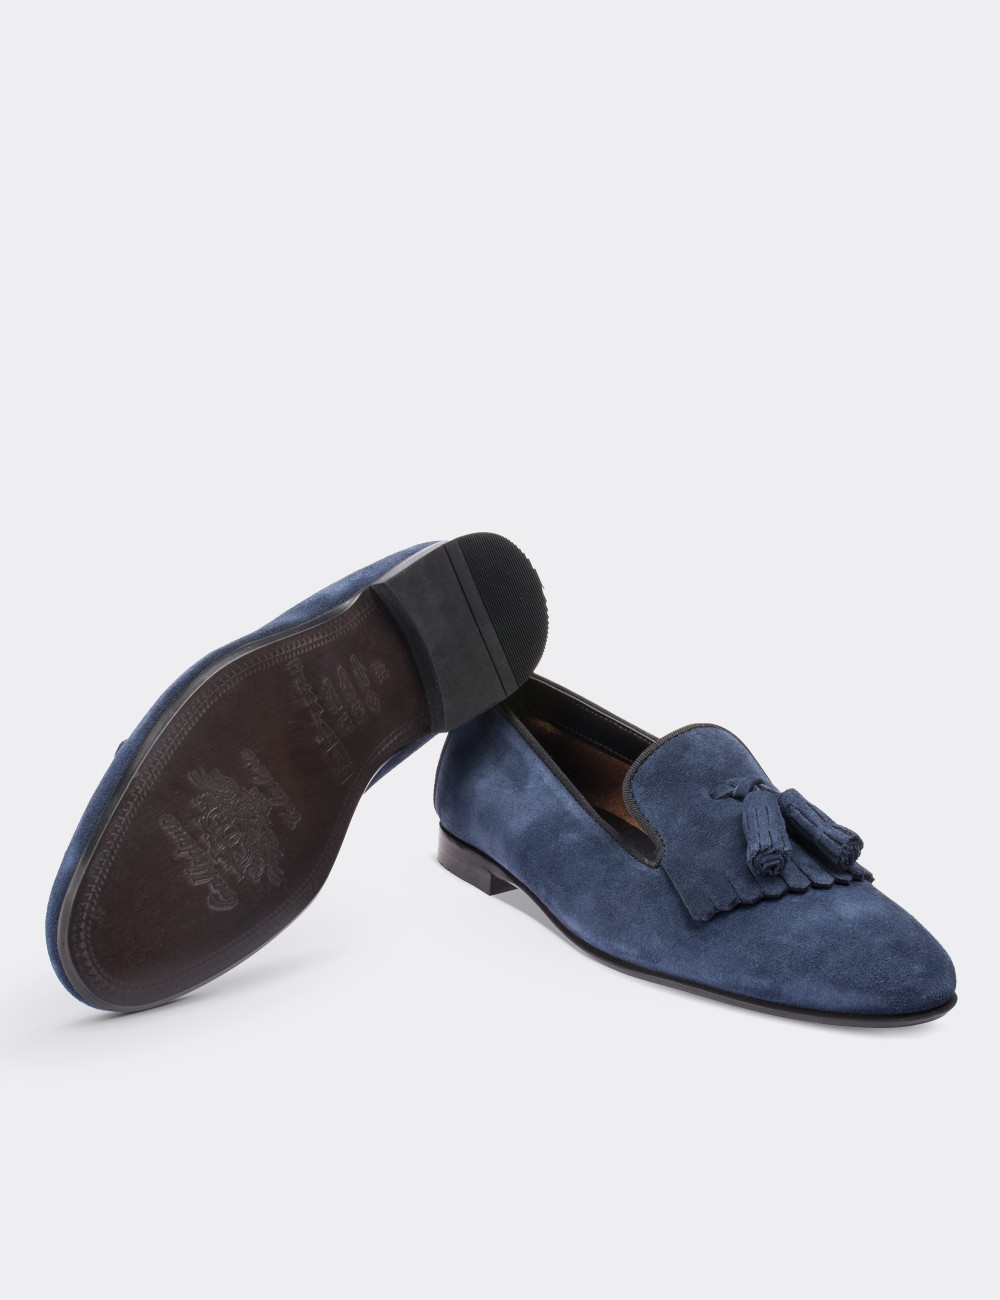 Navy Suede Leather Loafers - 01612ZLCVM01